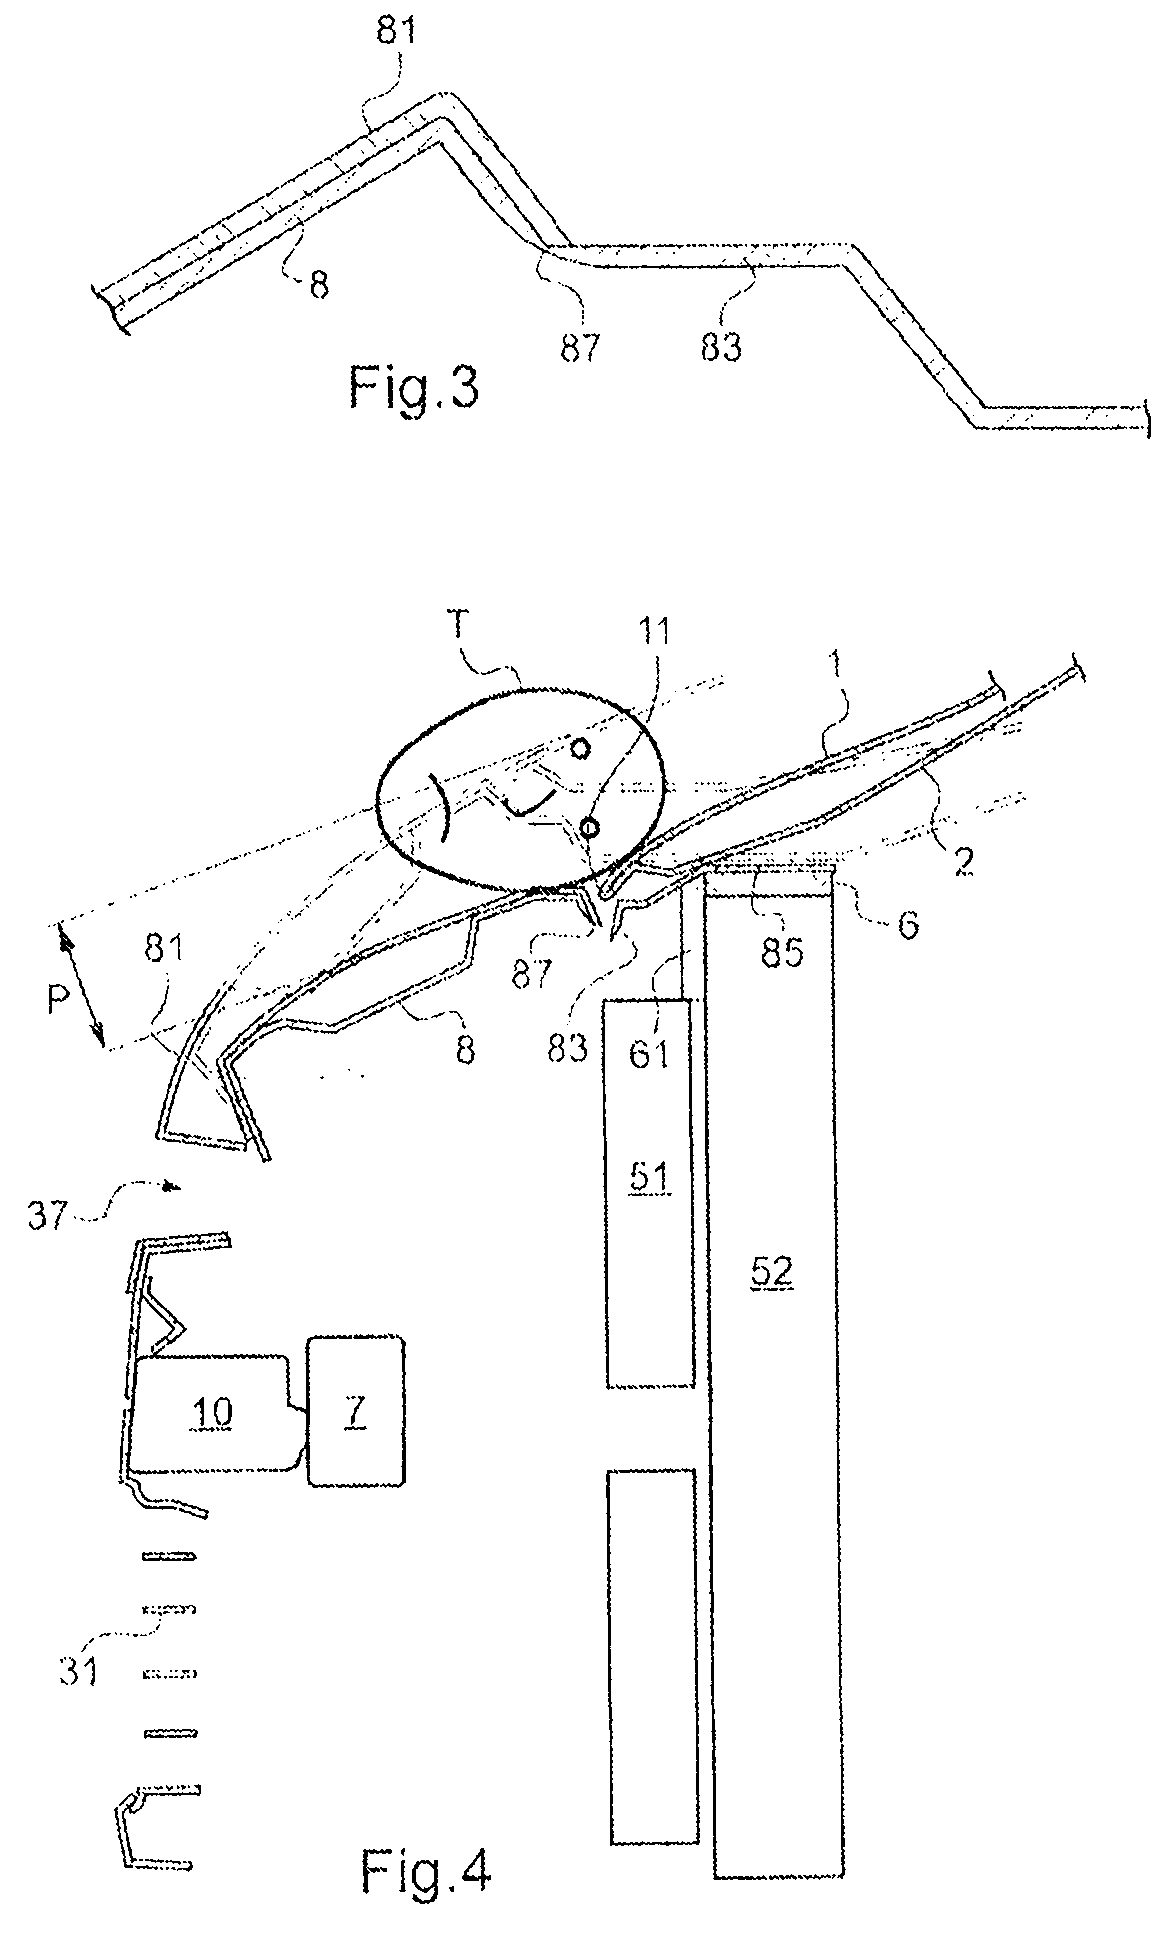 Automobile comprising a front bumper with a central portion extending as far as the bonnet of said vehicle